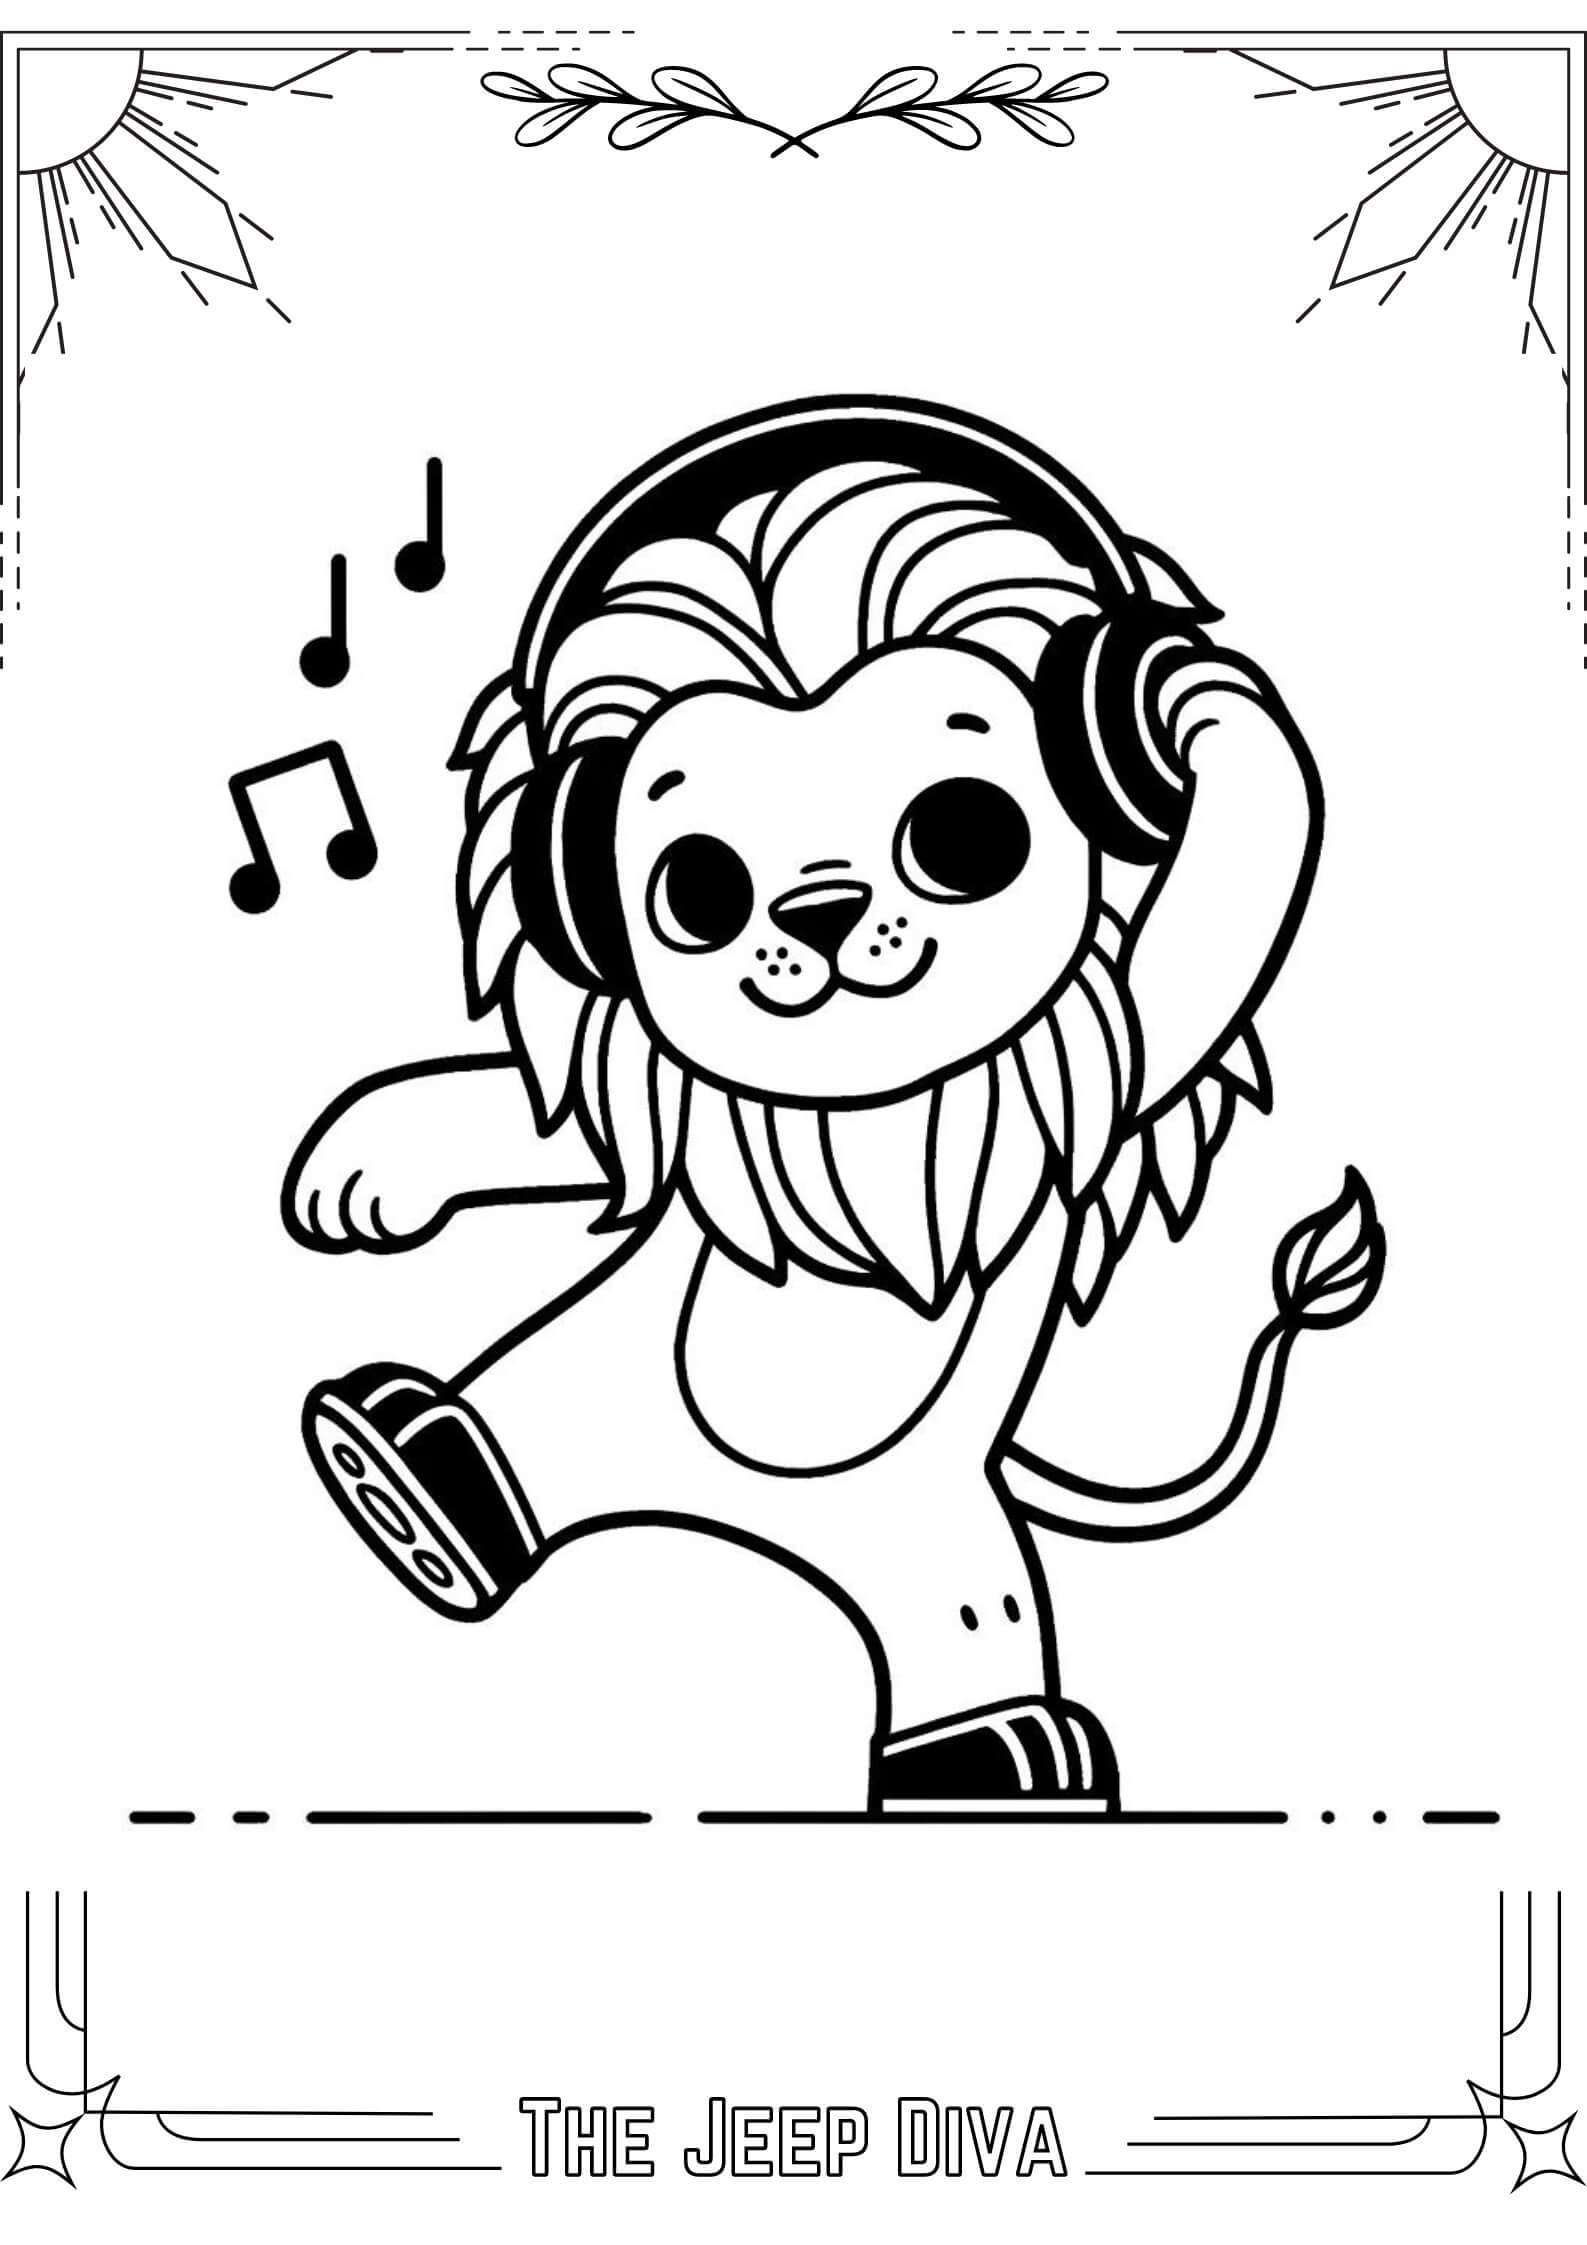 The Jeep Diva Coloring Page Lion Medium Difficulty 15